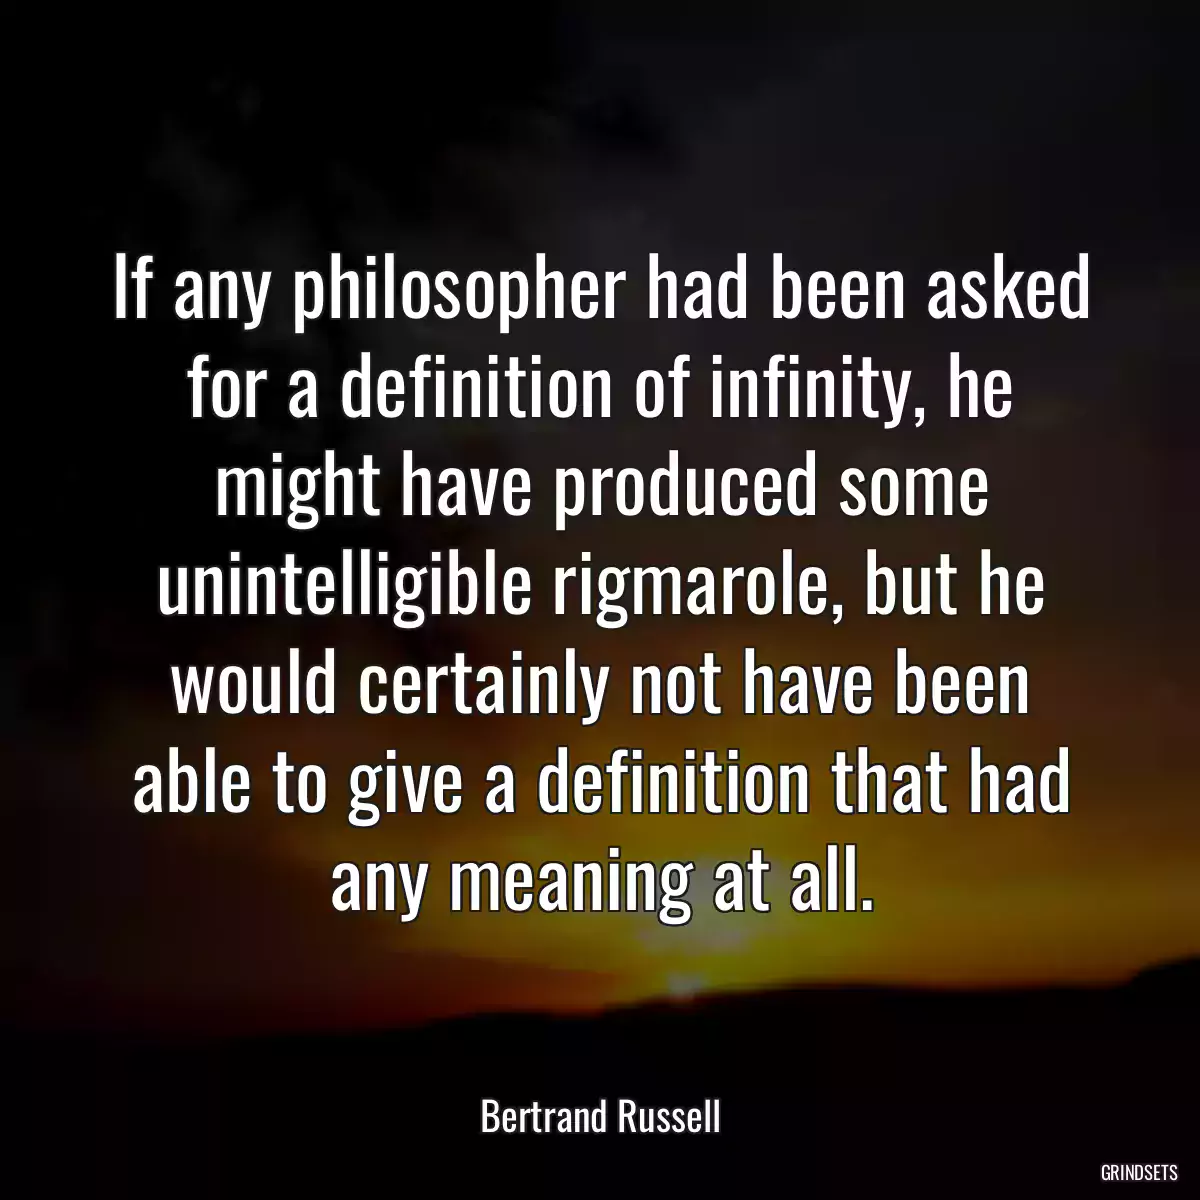 If any philosopher had been asked for a definition of infinity, he might have produced some unintelligible rigmarole, but he would certainly not have been able to give a definition that had any meaning at all.